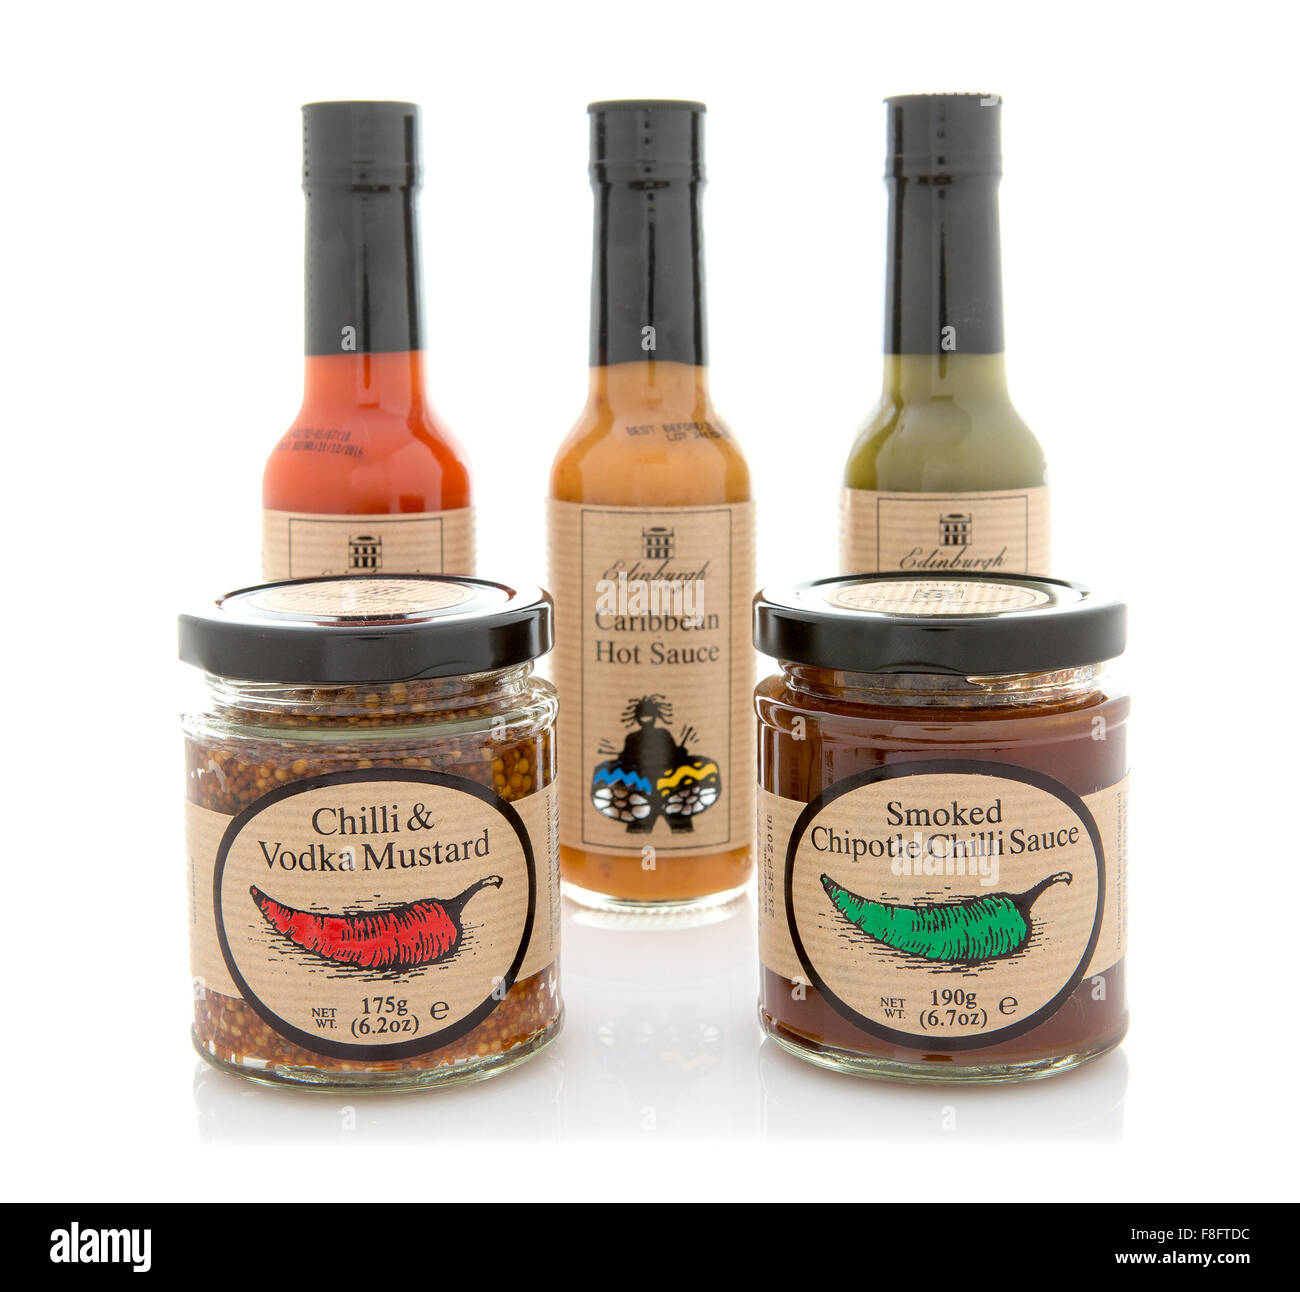 Collection of Sauces with Chilli and Vodka Mustard, Smoked Chipotle Chilli on a White Background Stock Photo